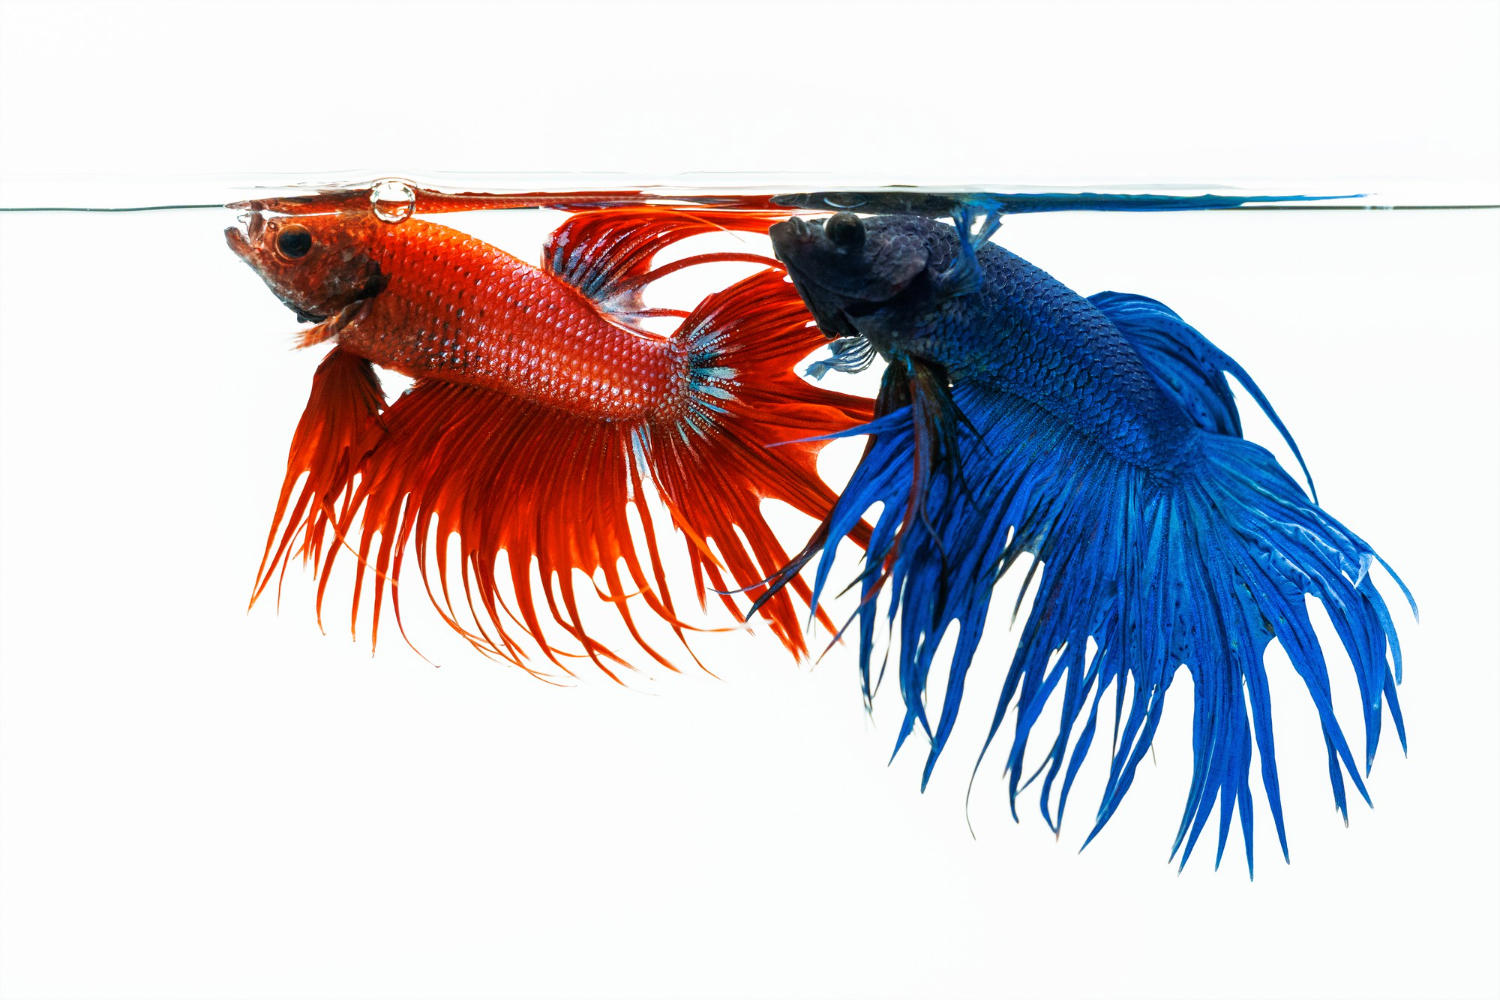 Expert Tips: The Ultimate Guide to Cleaning Aquarium Decorations